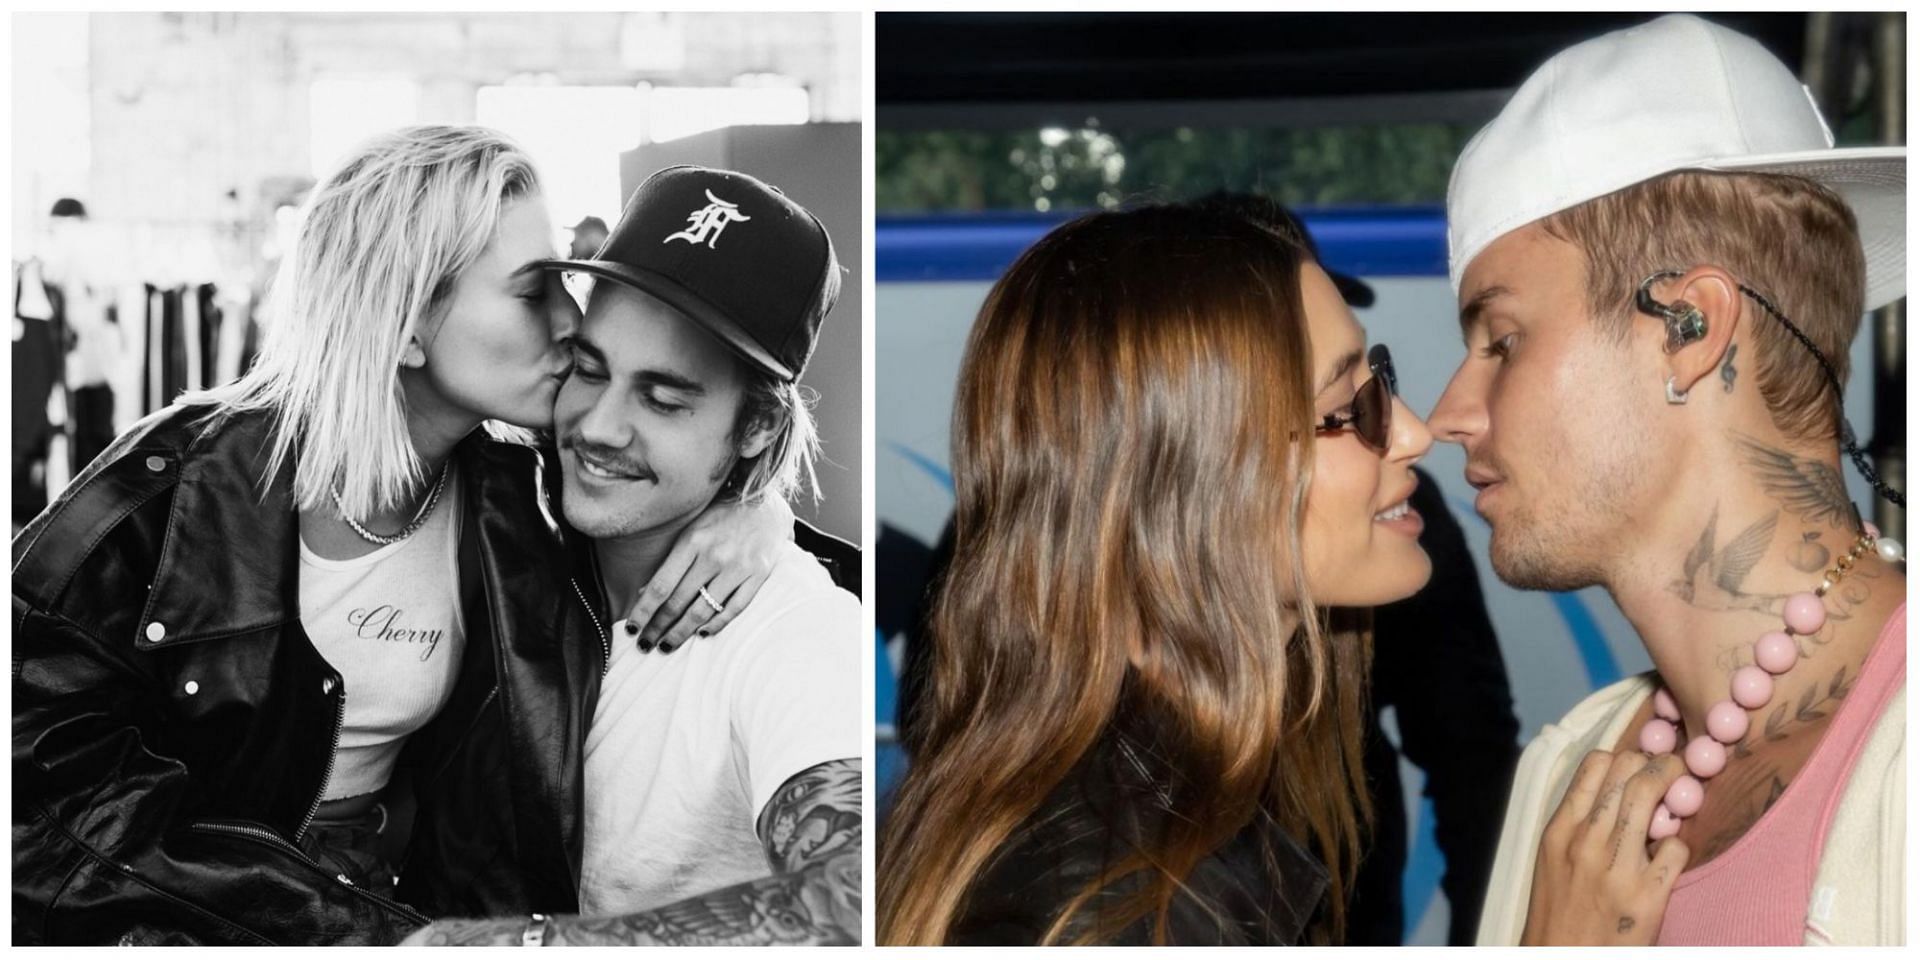 Hailey Bieber Says Her Marriage to Justin Bieber Takes A Lot of Work